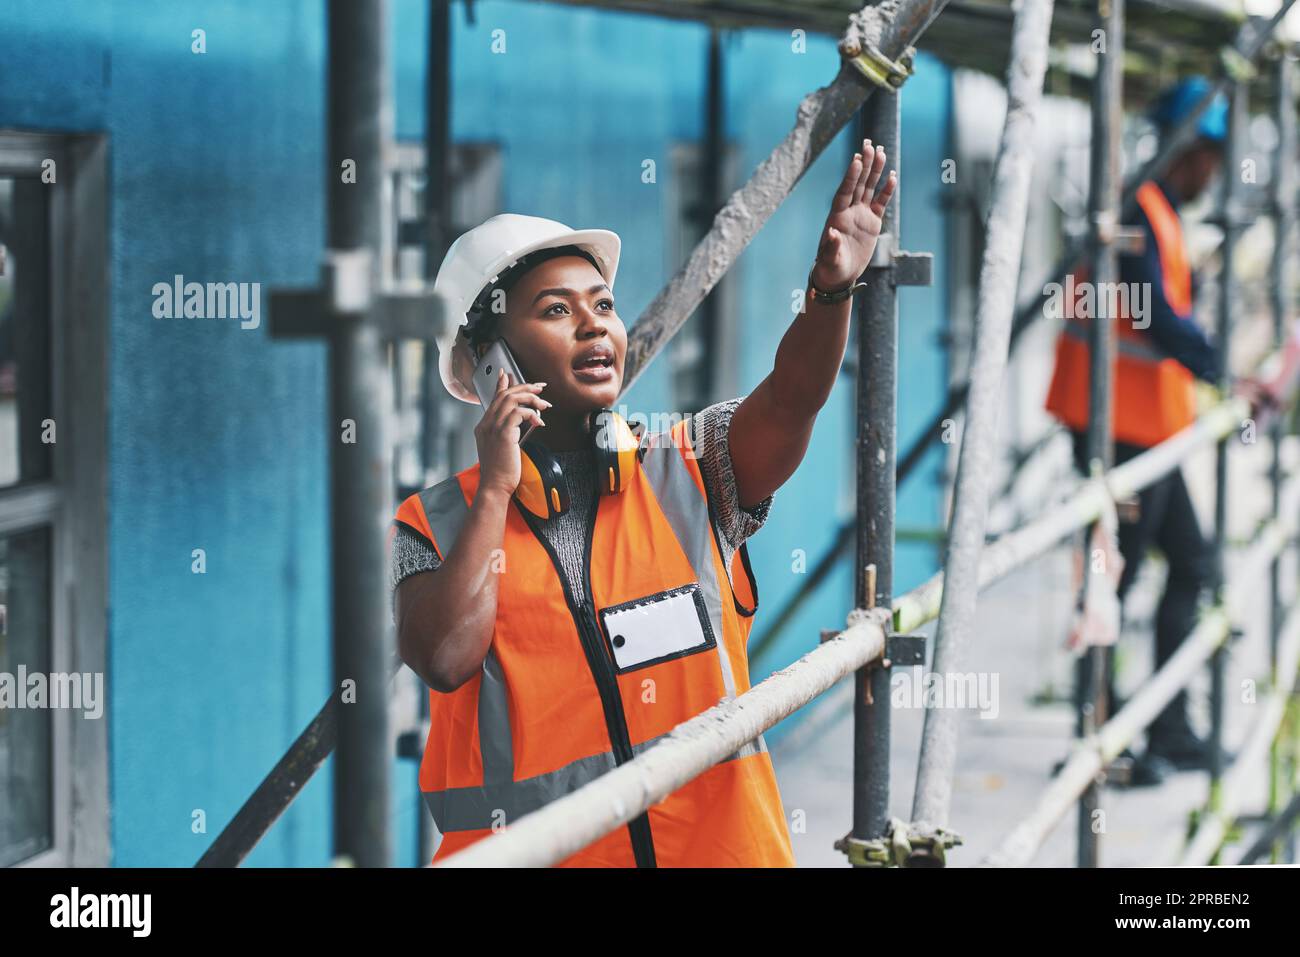 Springing into action as the supervisor. a young woman talking on a cellphone while working at a construction site. Stock Photo